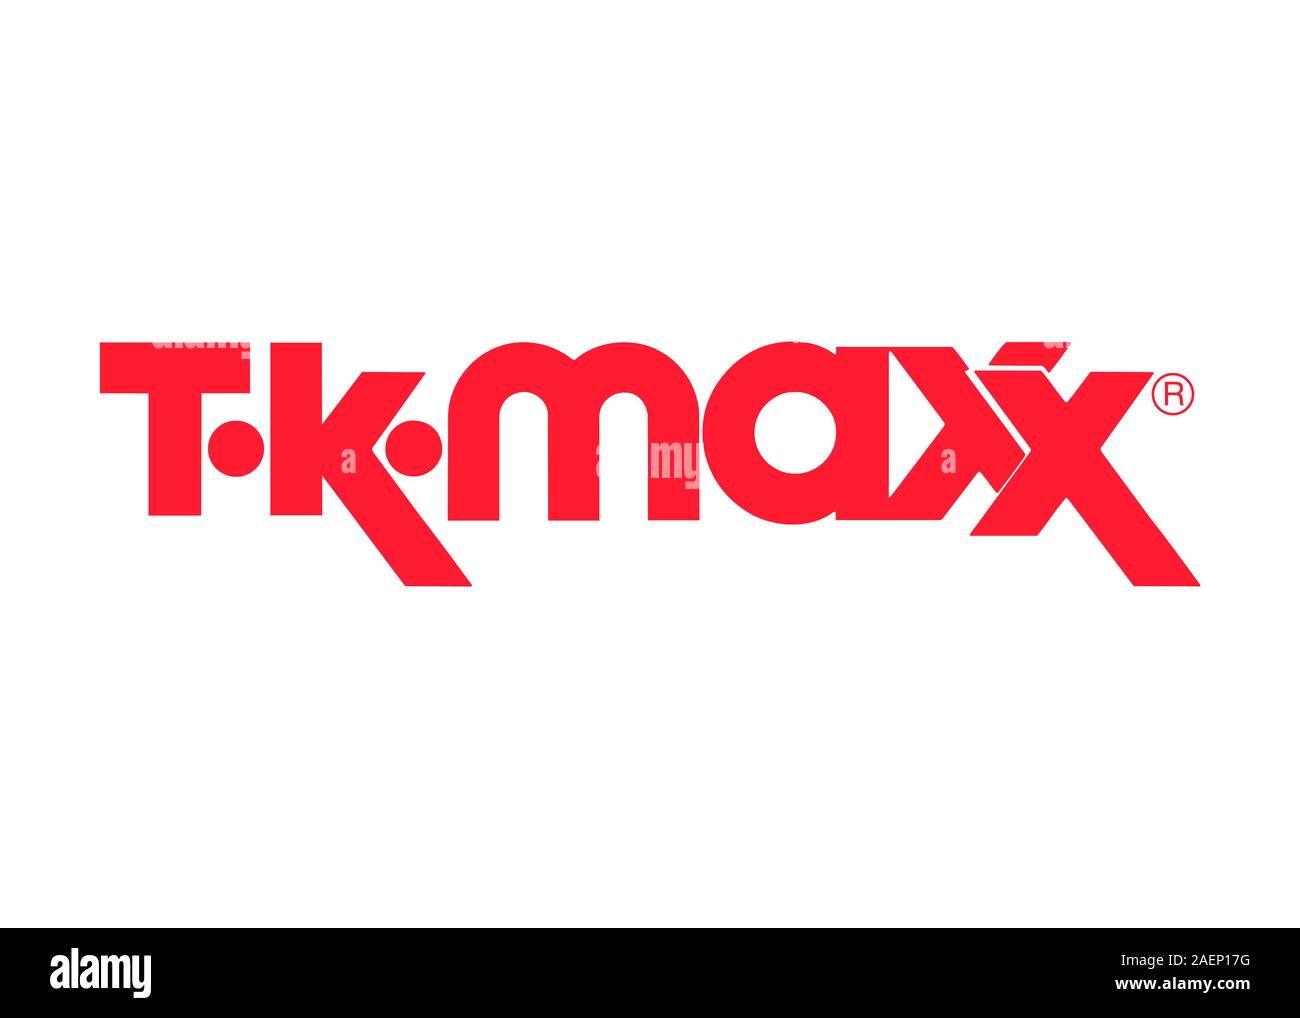 Tk maxx Cut Out Stock Images & Pictures - Alamy